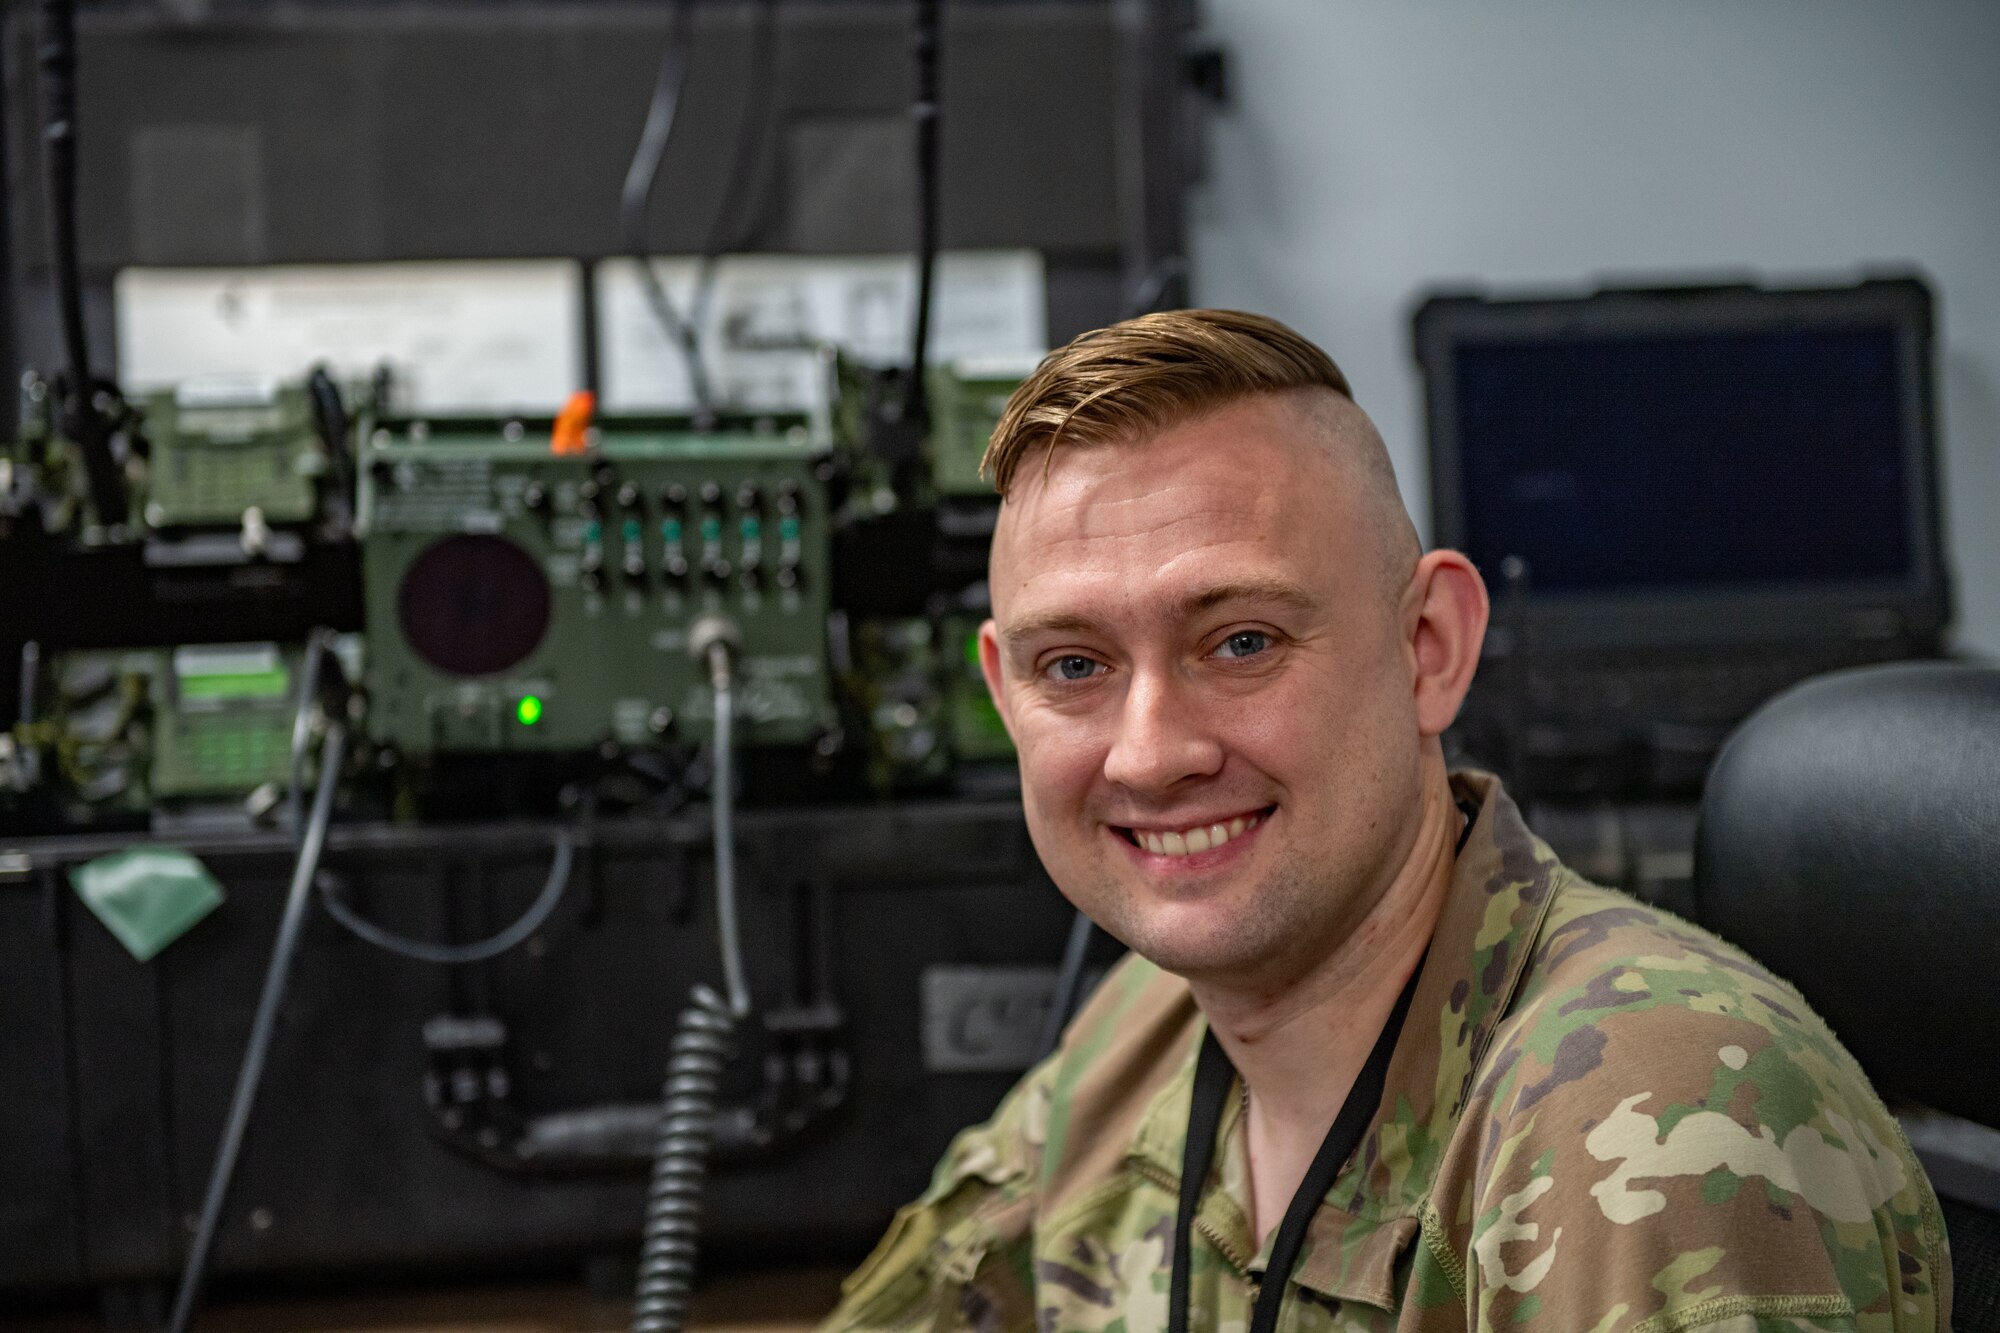 U.S. Air Force Capt. Drew Houghton, 71st Rescue Squadron combat systems officer, poses for a photo during Exercise Ready Tiger 24-1 at Savannah Air National Guard Base, Georgia, April 9, 2024. During Ready Tiger 24-1, the 23rd Wing will be evaluated on the integration of Air Force Force Generation principles such as Agile Combat Employment, integrated combat turns, forward aerial refueling points, multi-capable Airmen, and combat search and rescue capabilities. (U.S. Air Force photo by Senior Airman Courtney Sebastianelli)